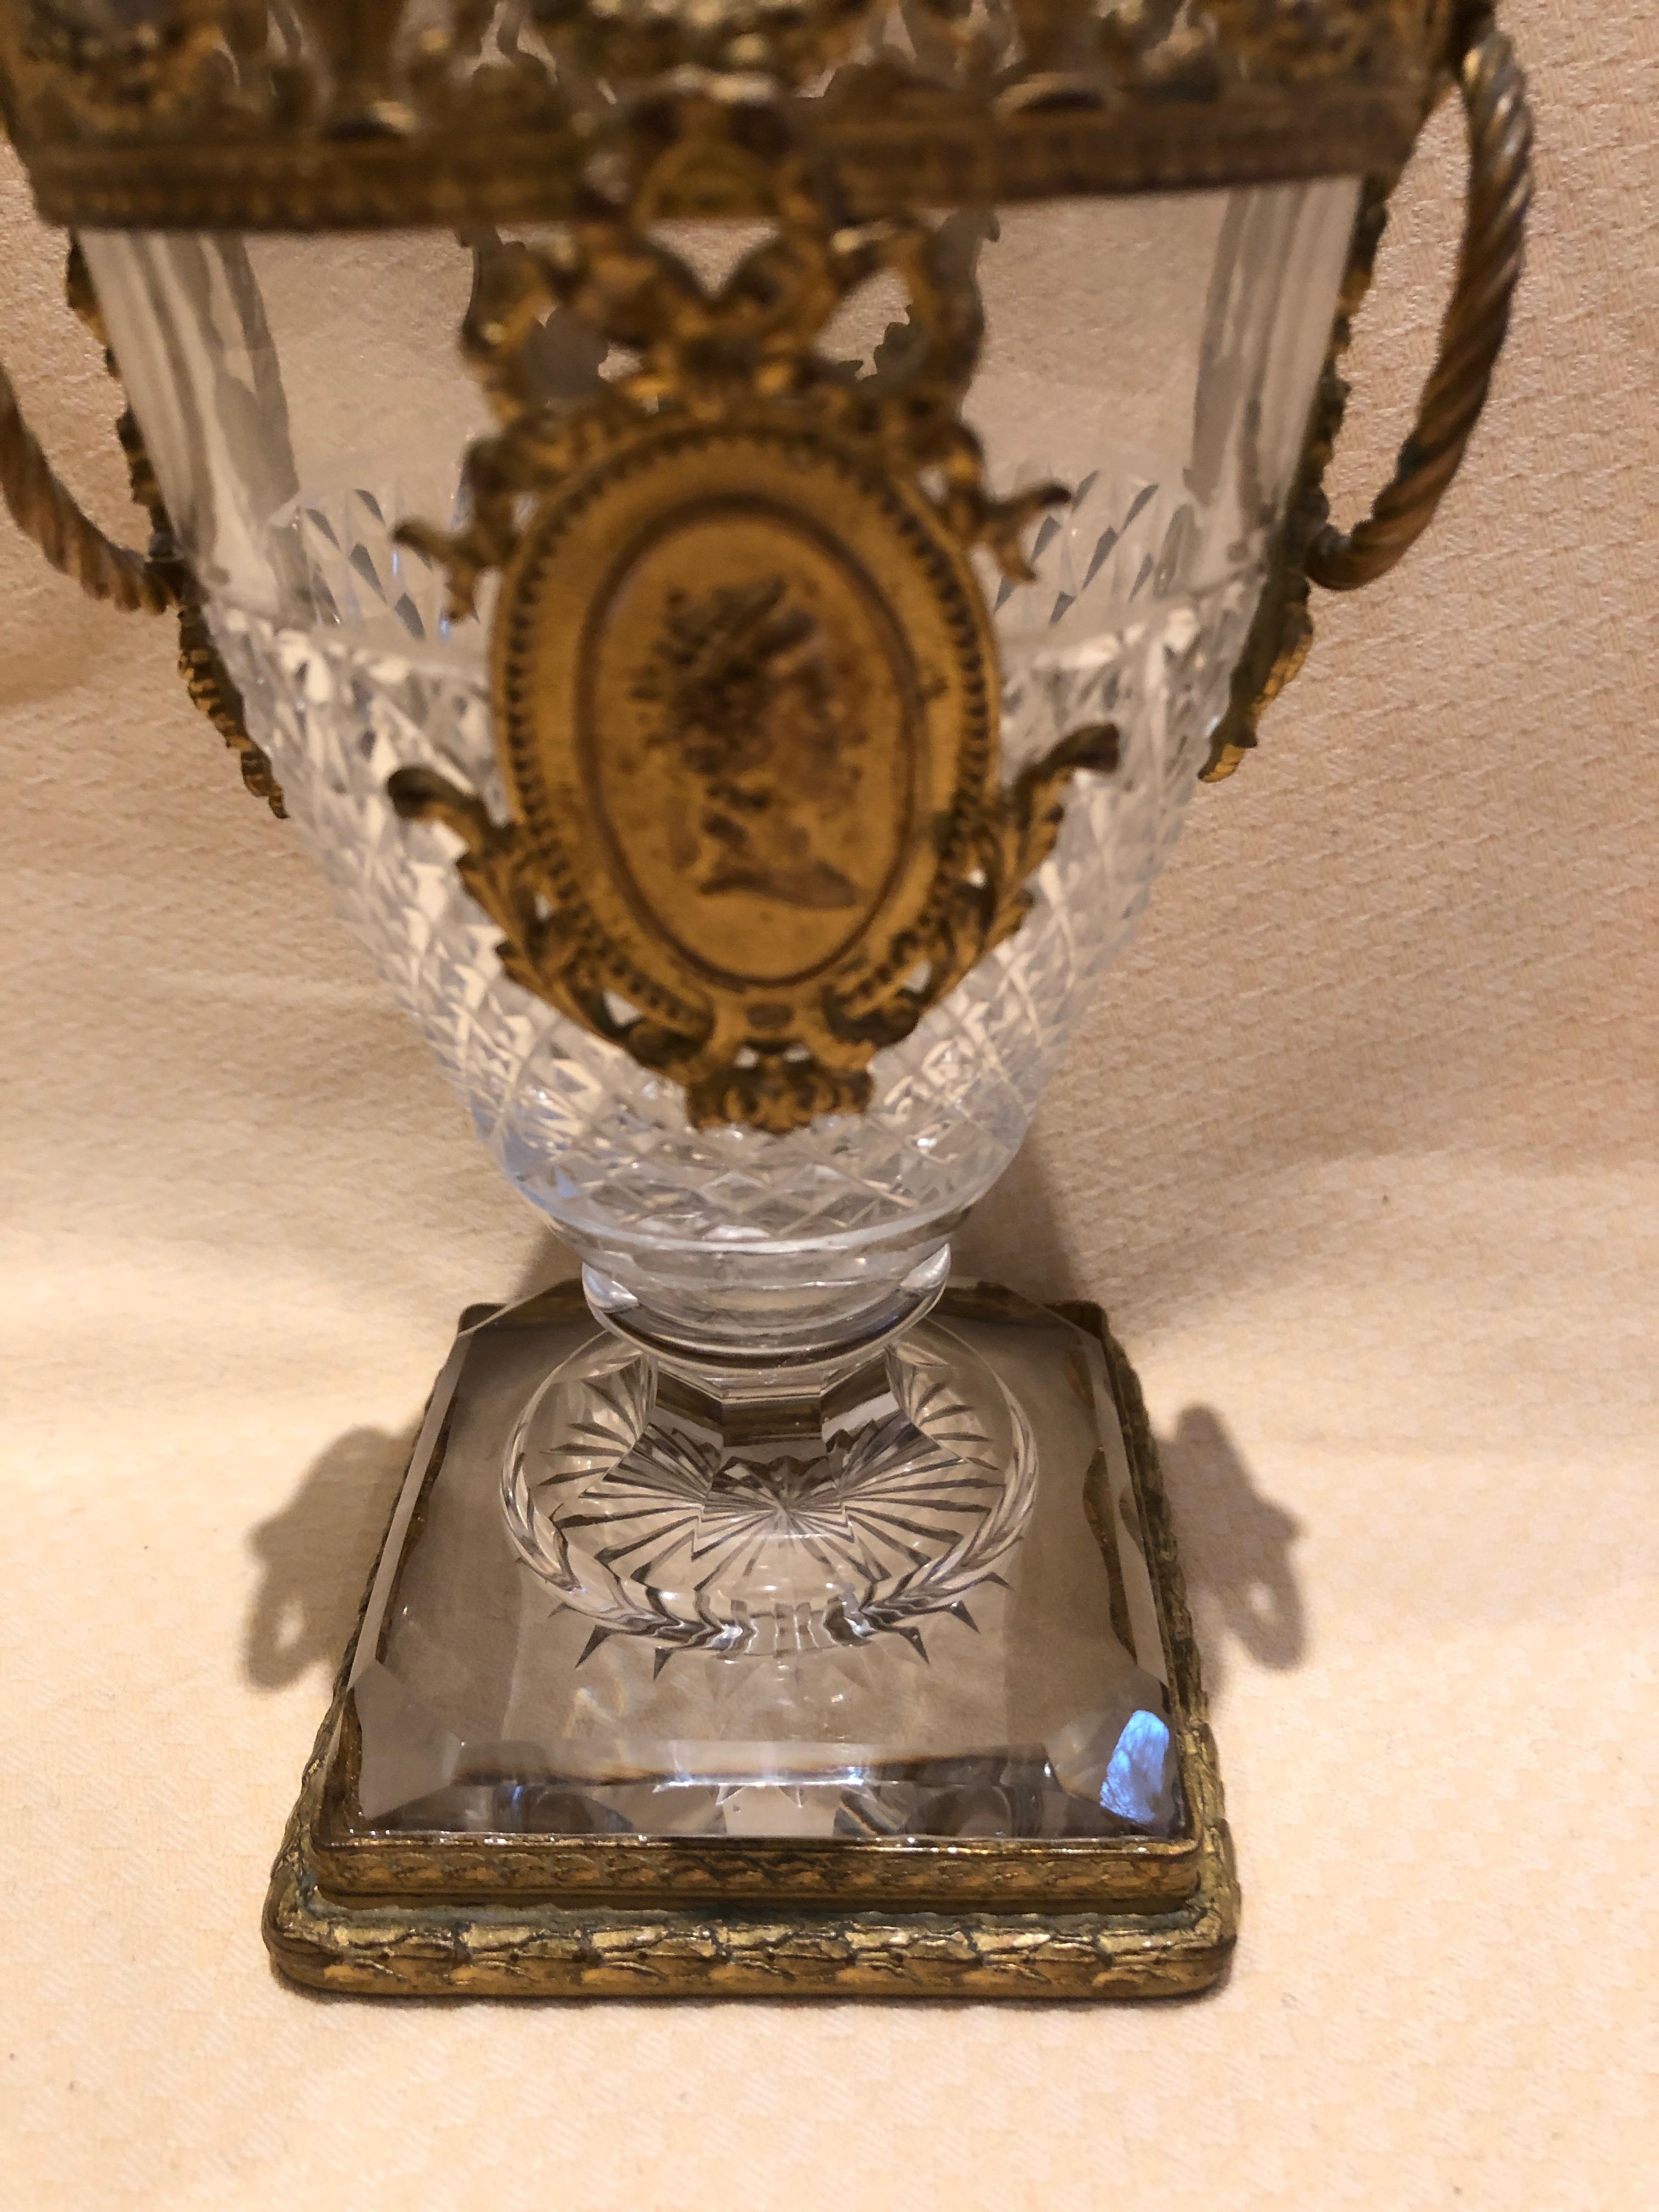 A magnificent small cut crystal vase having ornate ormolu mountings with swag and central cameo as well as side rings.